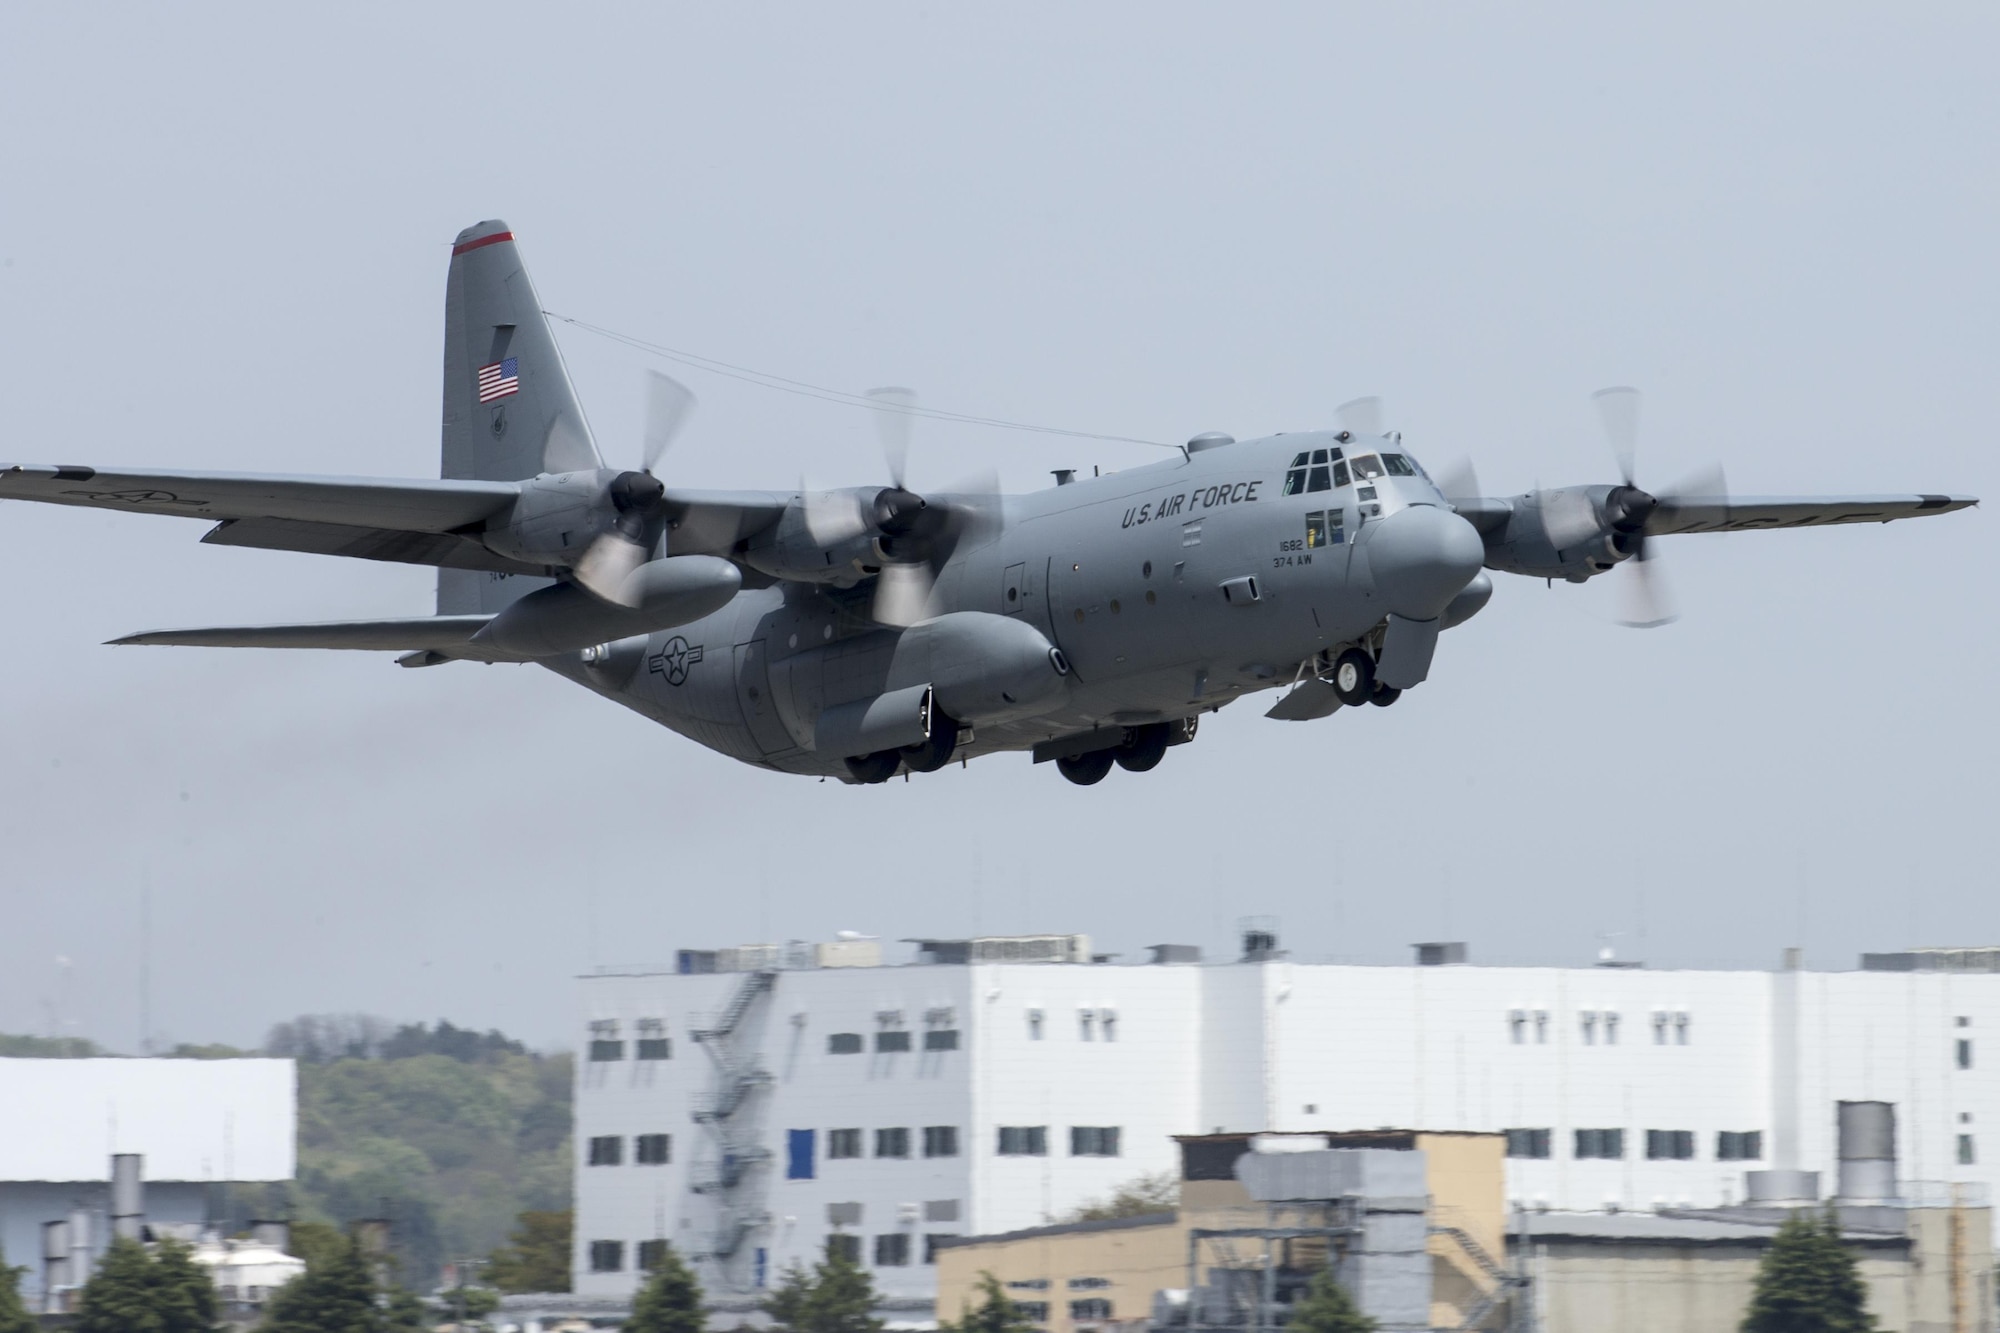 A C-130 Hercules takes off from Yokota Air Base, Japan, April 18, 2016. The 374th Airlift Wing sent two aircraft in support of the government of Japan in their relief efforts for the series of earthquakes that took place in the Kyushu region recently. The aircraft transported heavy vehicles and personnel from Chitose Air Base, Hokkaido to Kyushu. (U.S. Air Force photo/Yasuo Osakabe)